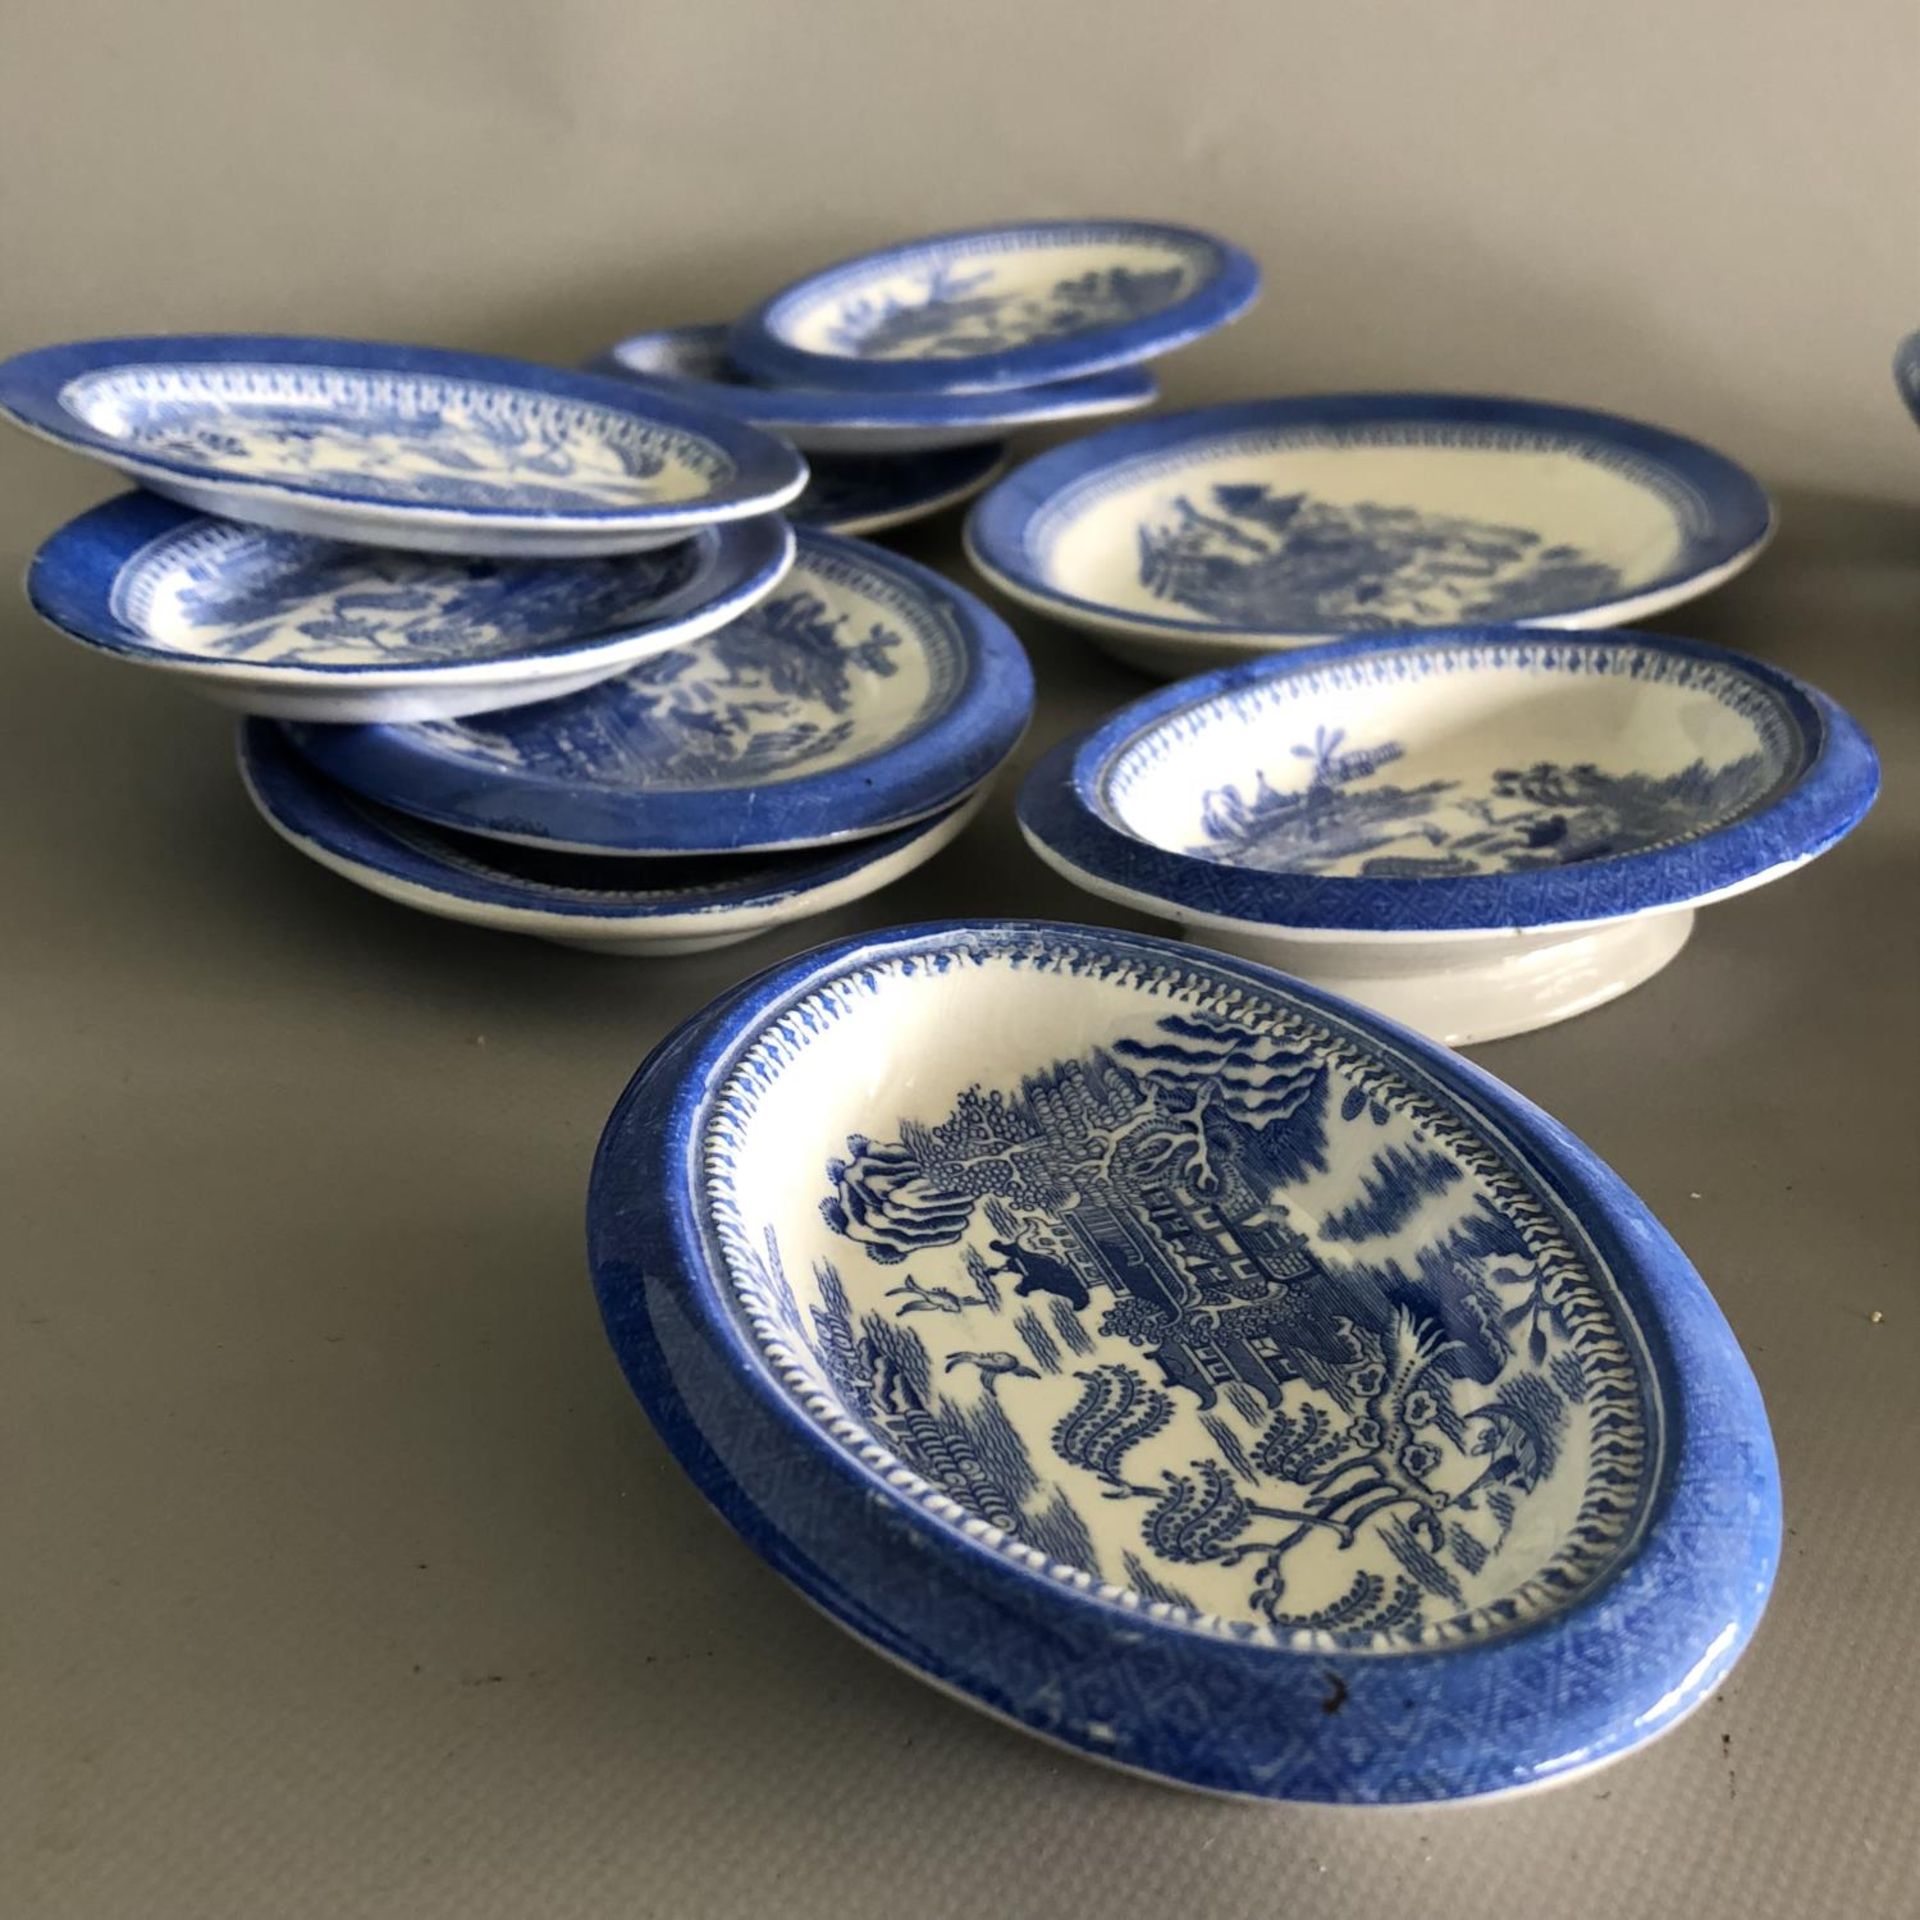 Copeland - Antique Willow Pattern Toy Child's Dinner Service 31 Pieces - c1860 - Image 9 of 9